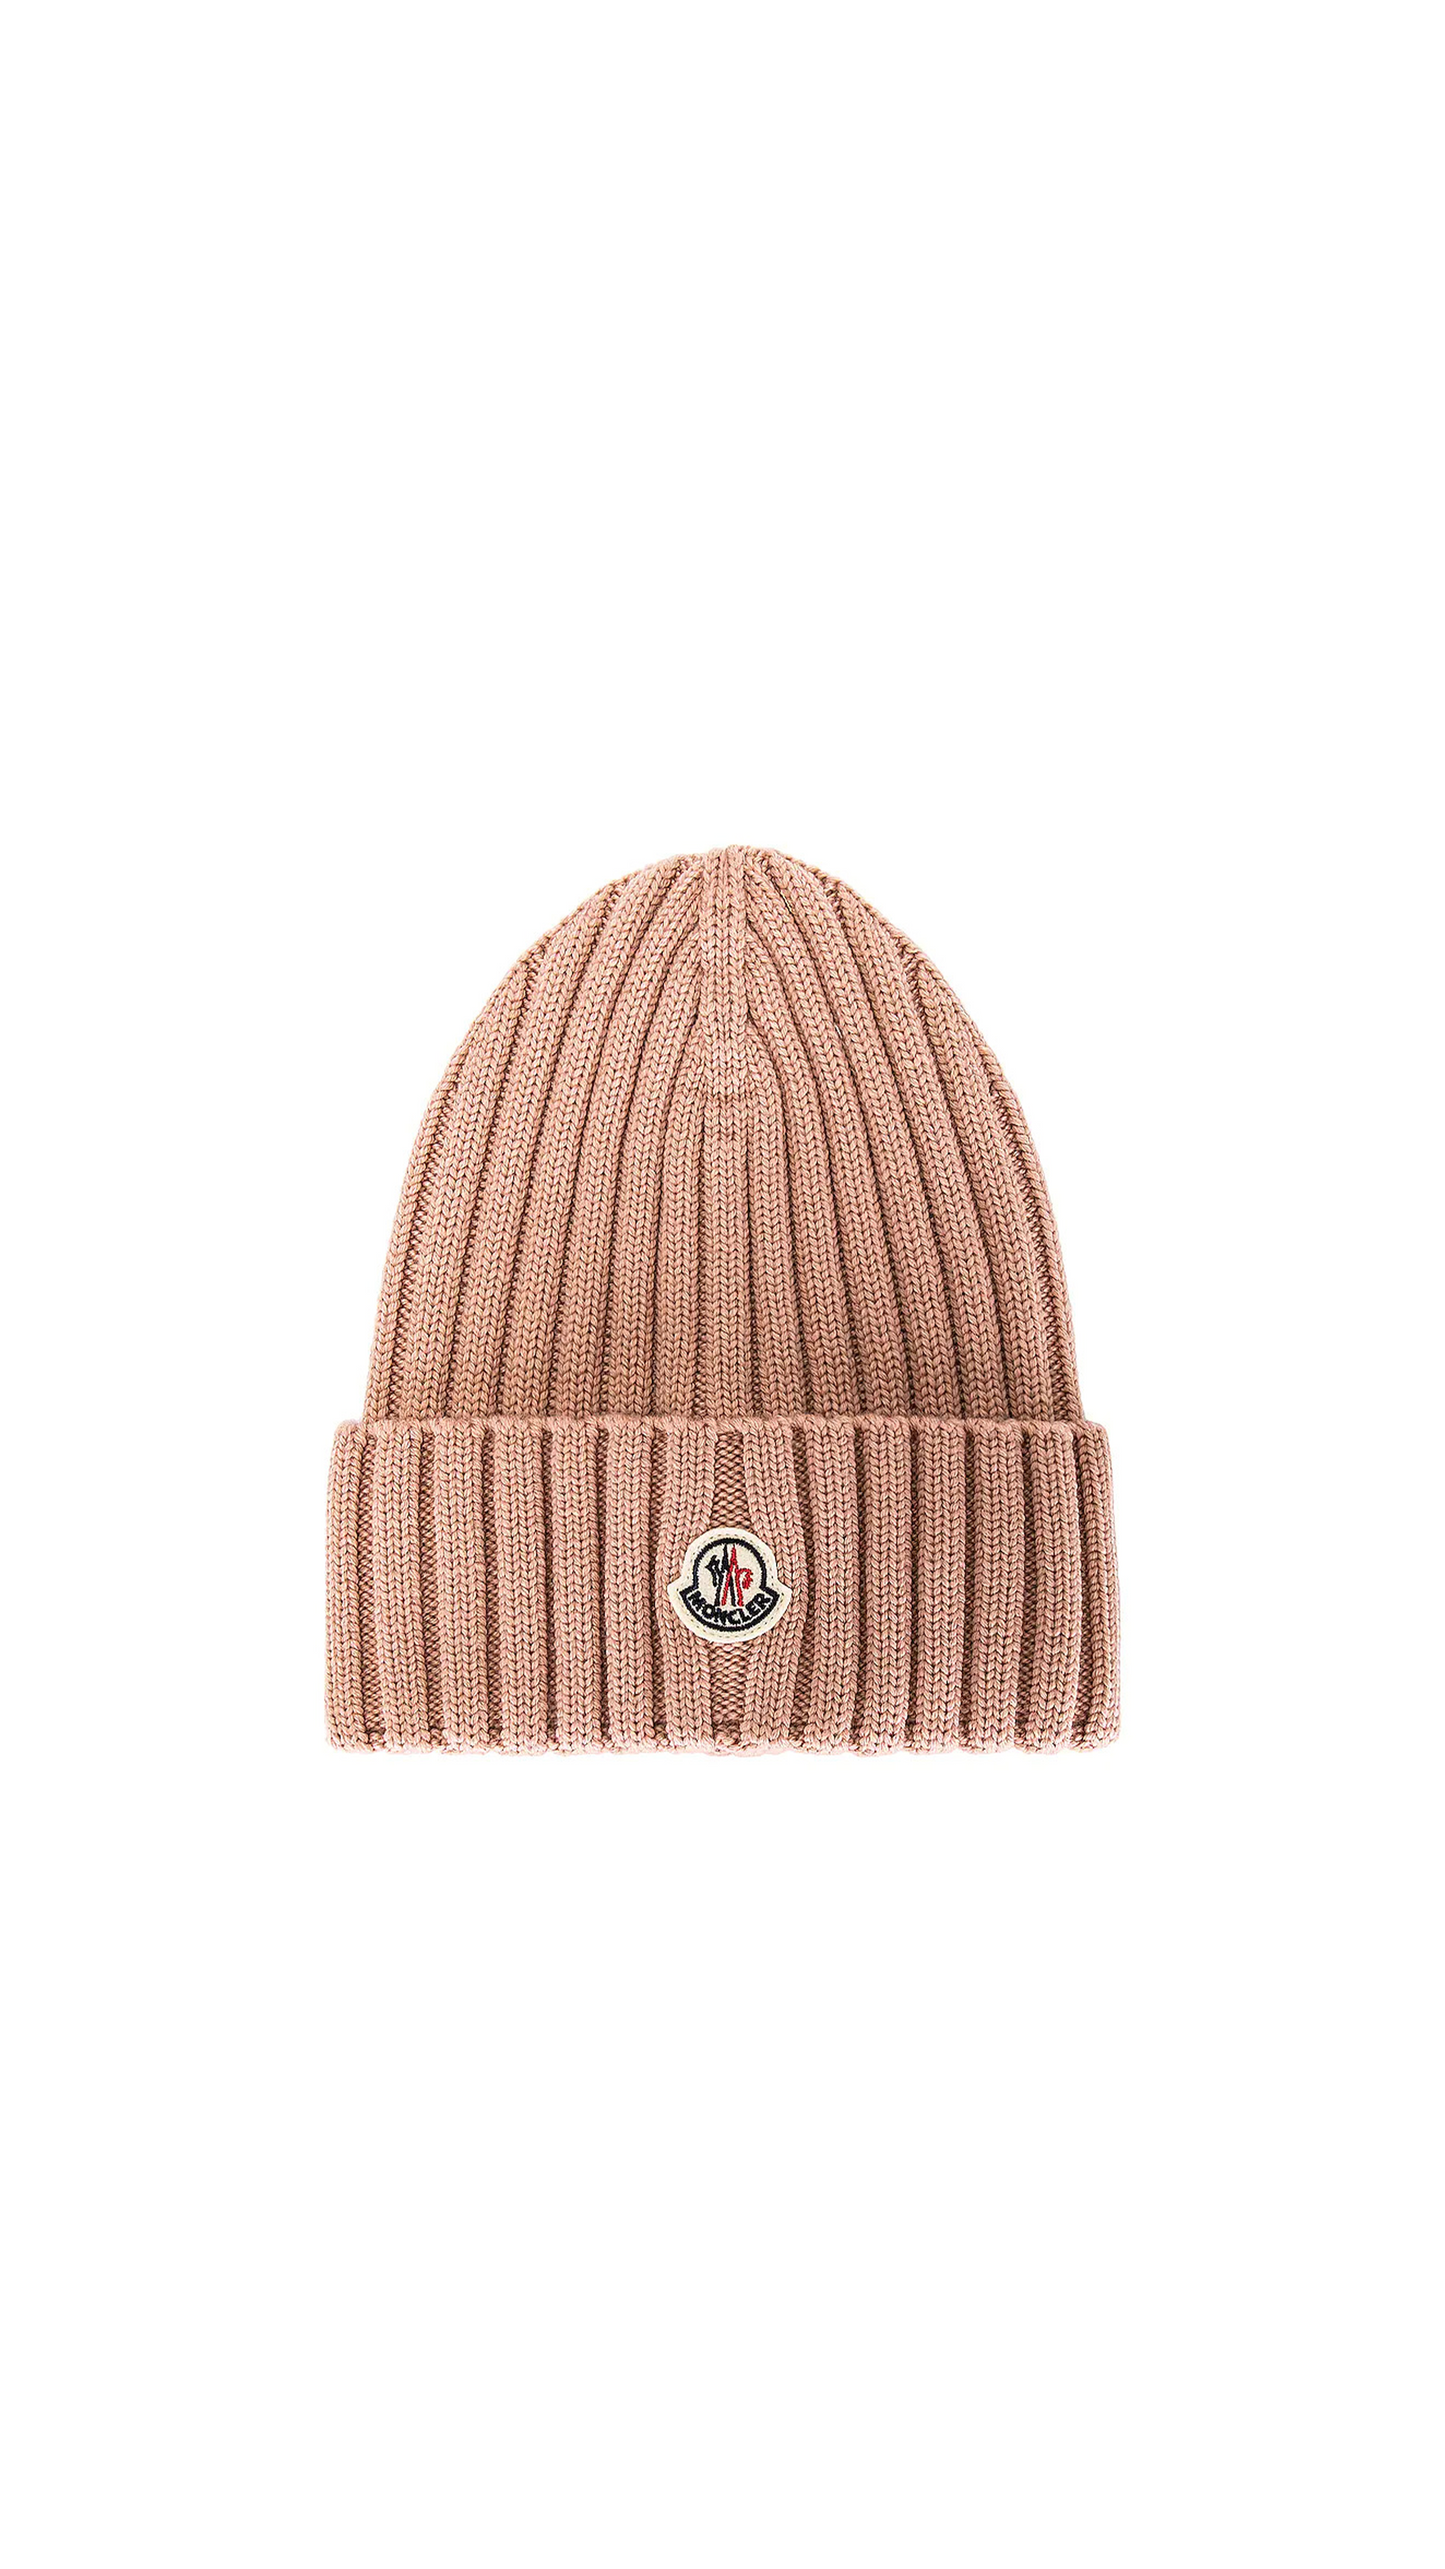 Ribbed Knit Wool Beanie - Pink